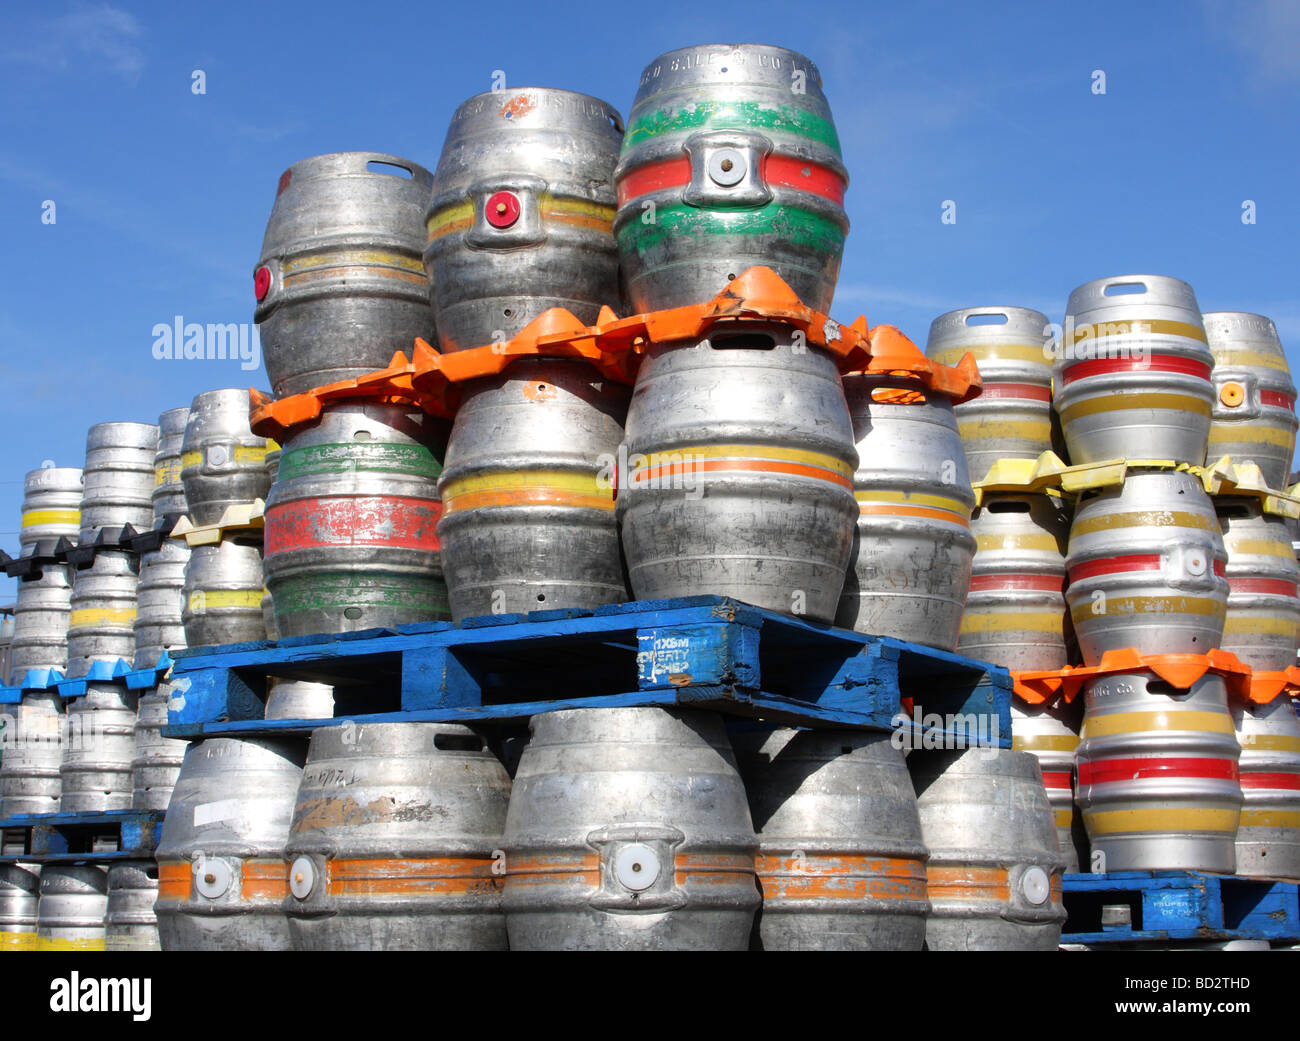 Beer kegs at a brewery in the U.K. Stock Photo